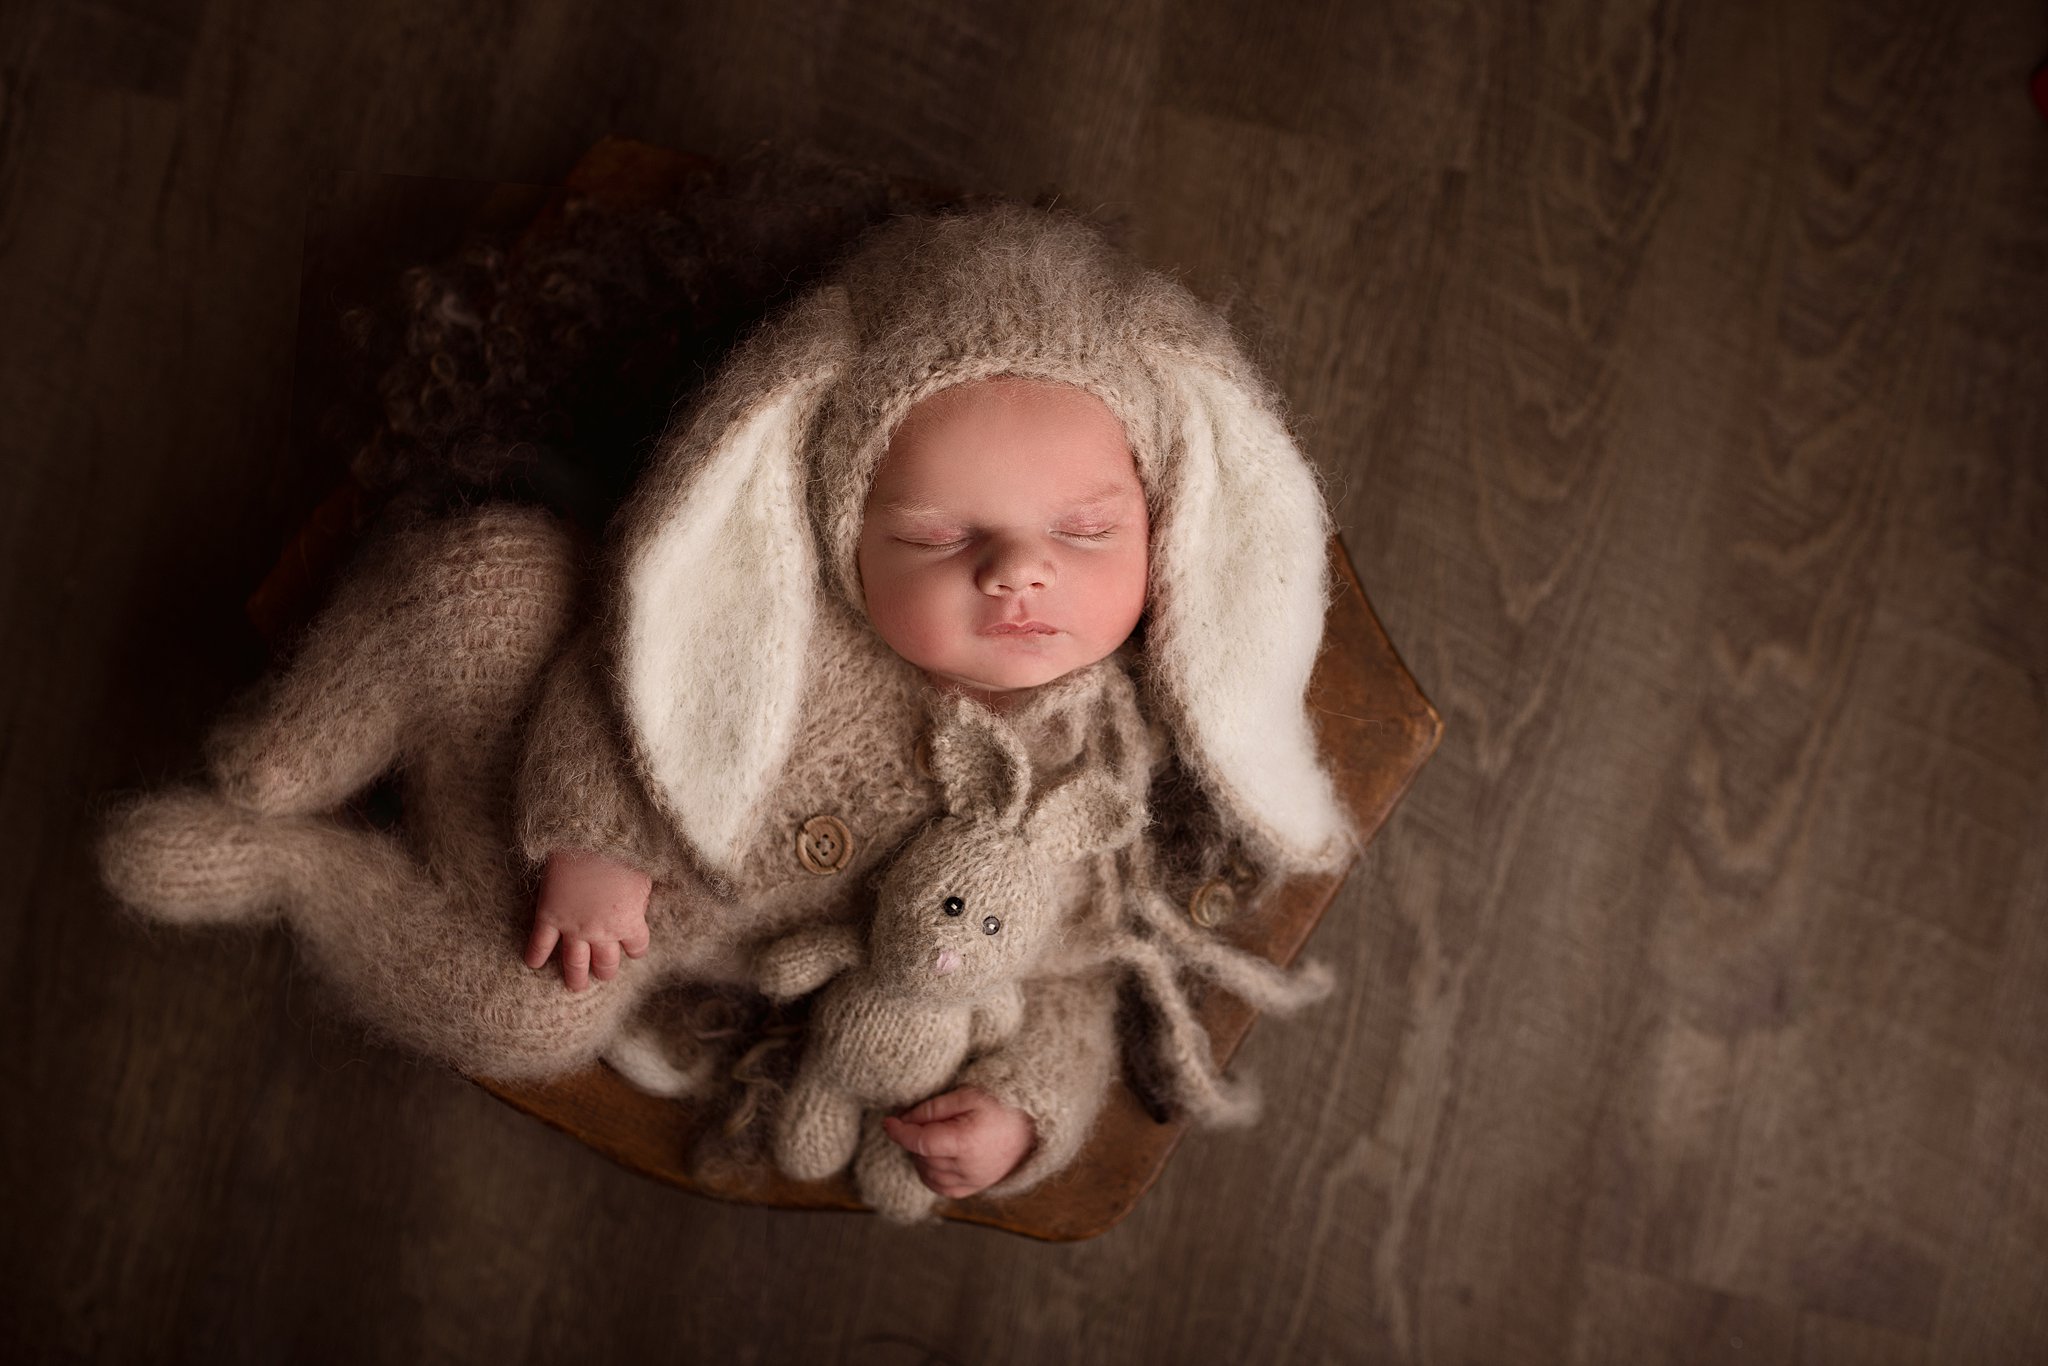 A newborn baby in a knit bunny costume with large ears sleeps on a bench on dark wood flooring baby furniture vaughan